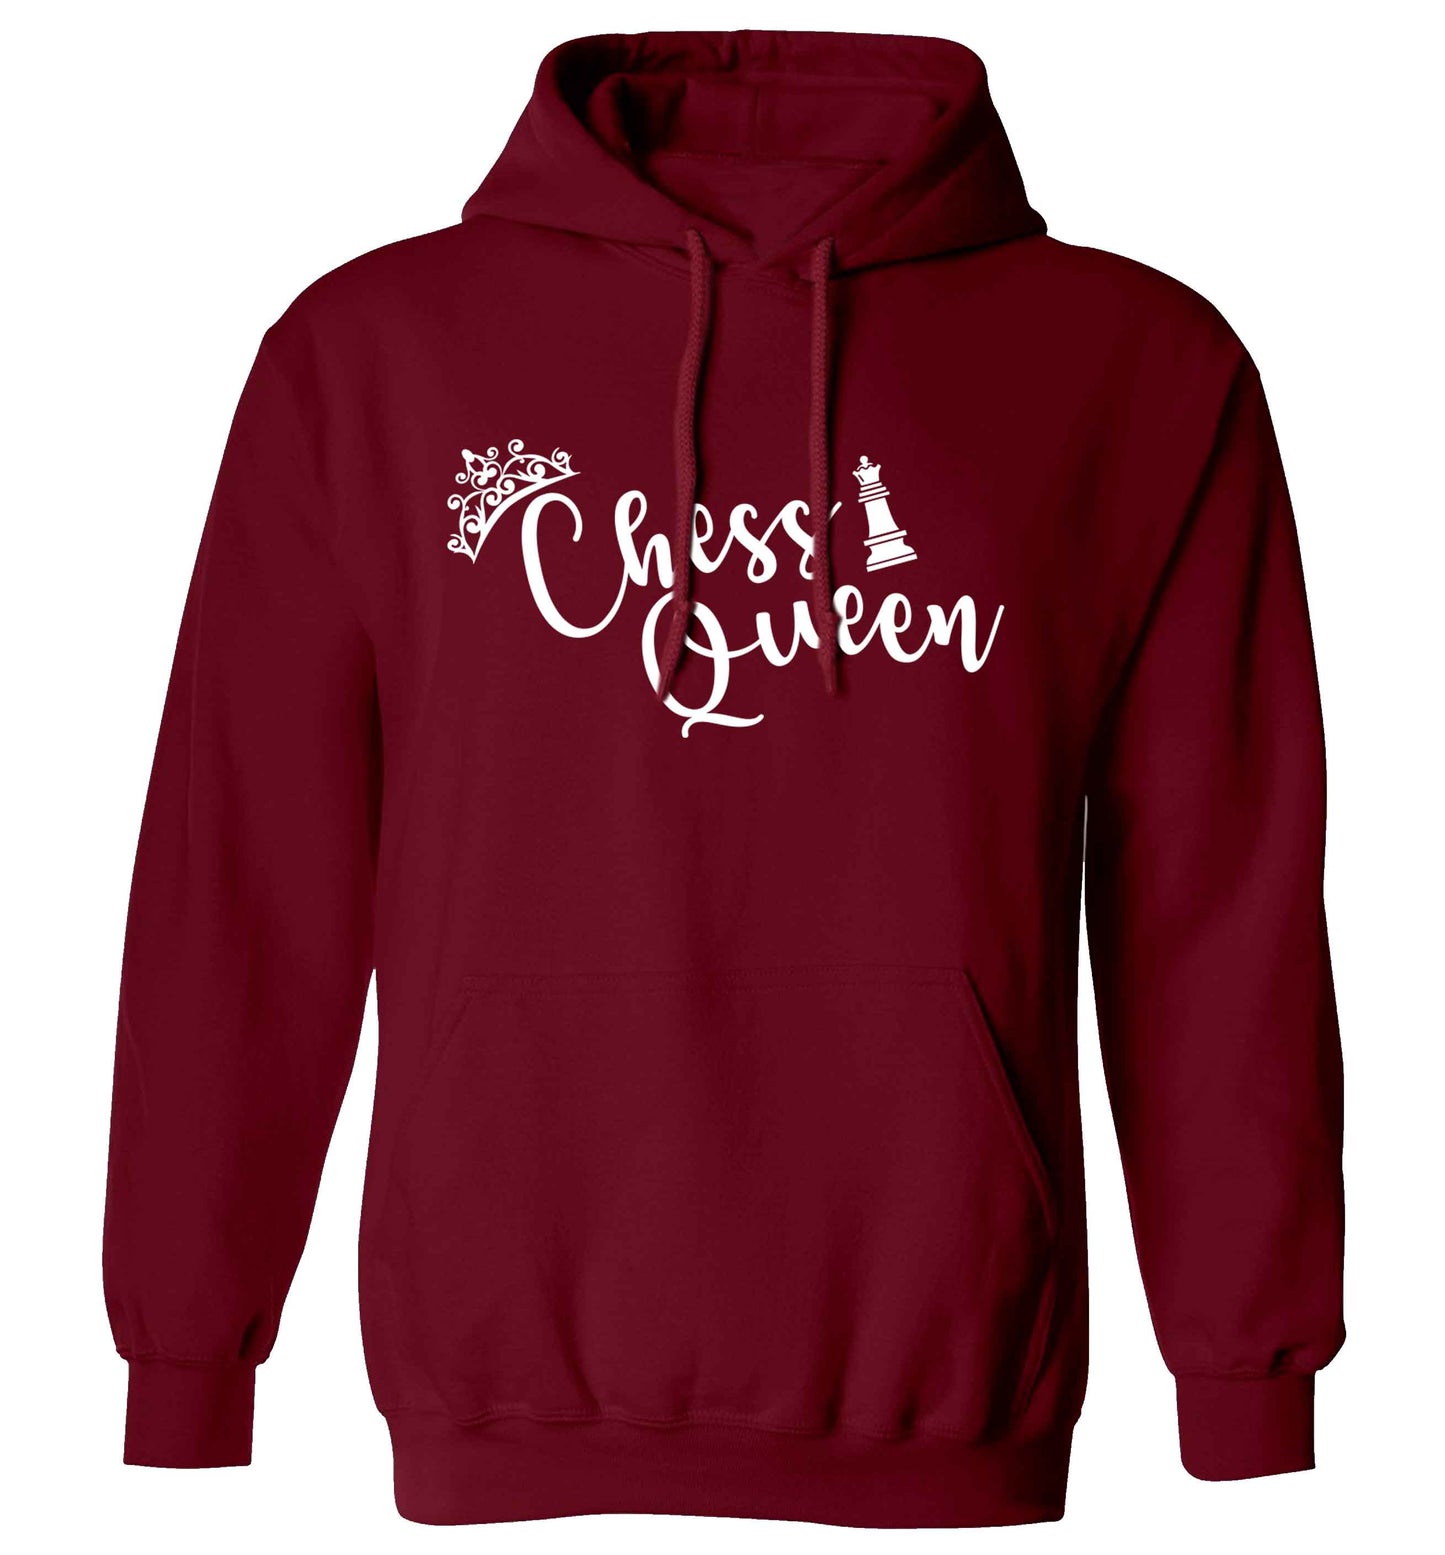 Pink chess queen  adults unisex maroon hoodie 2XL